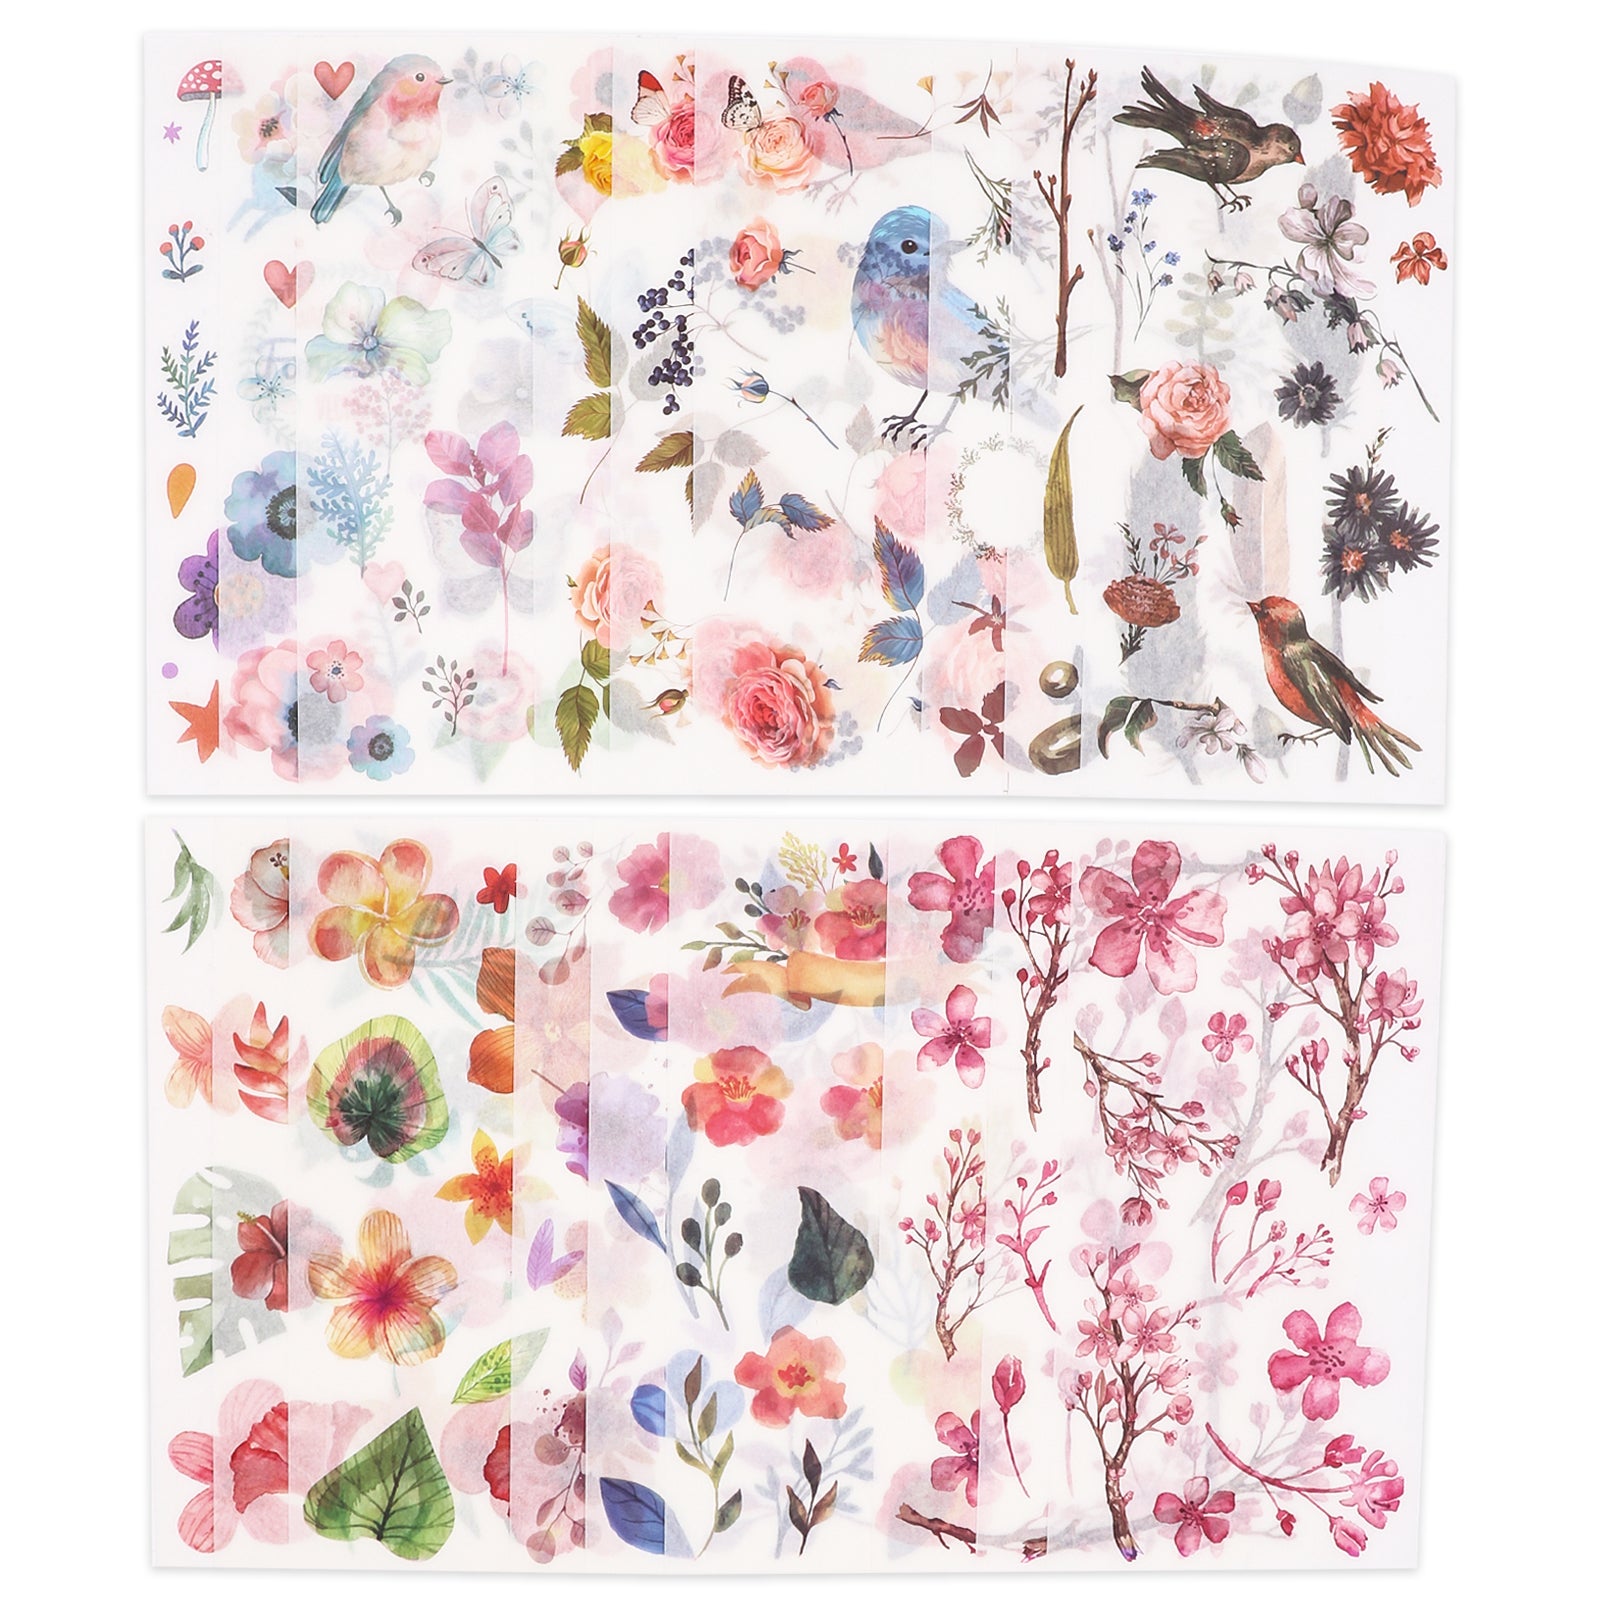 Watercolor Birds Stickers - Set of 52 Stickers